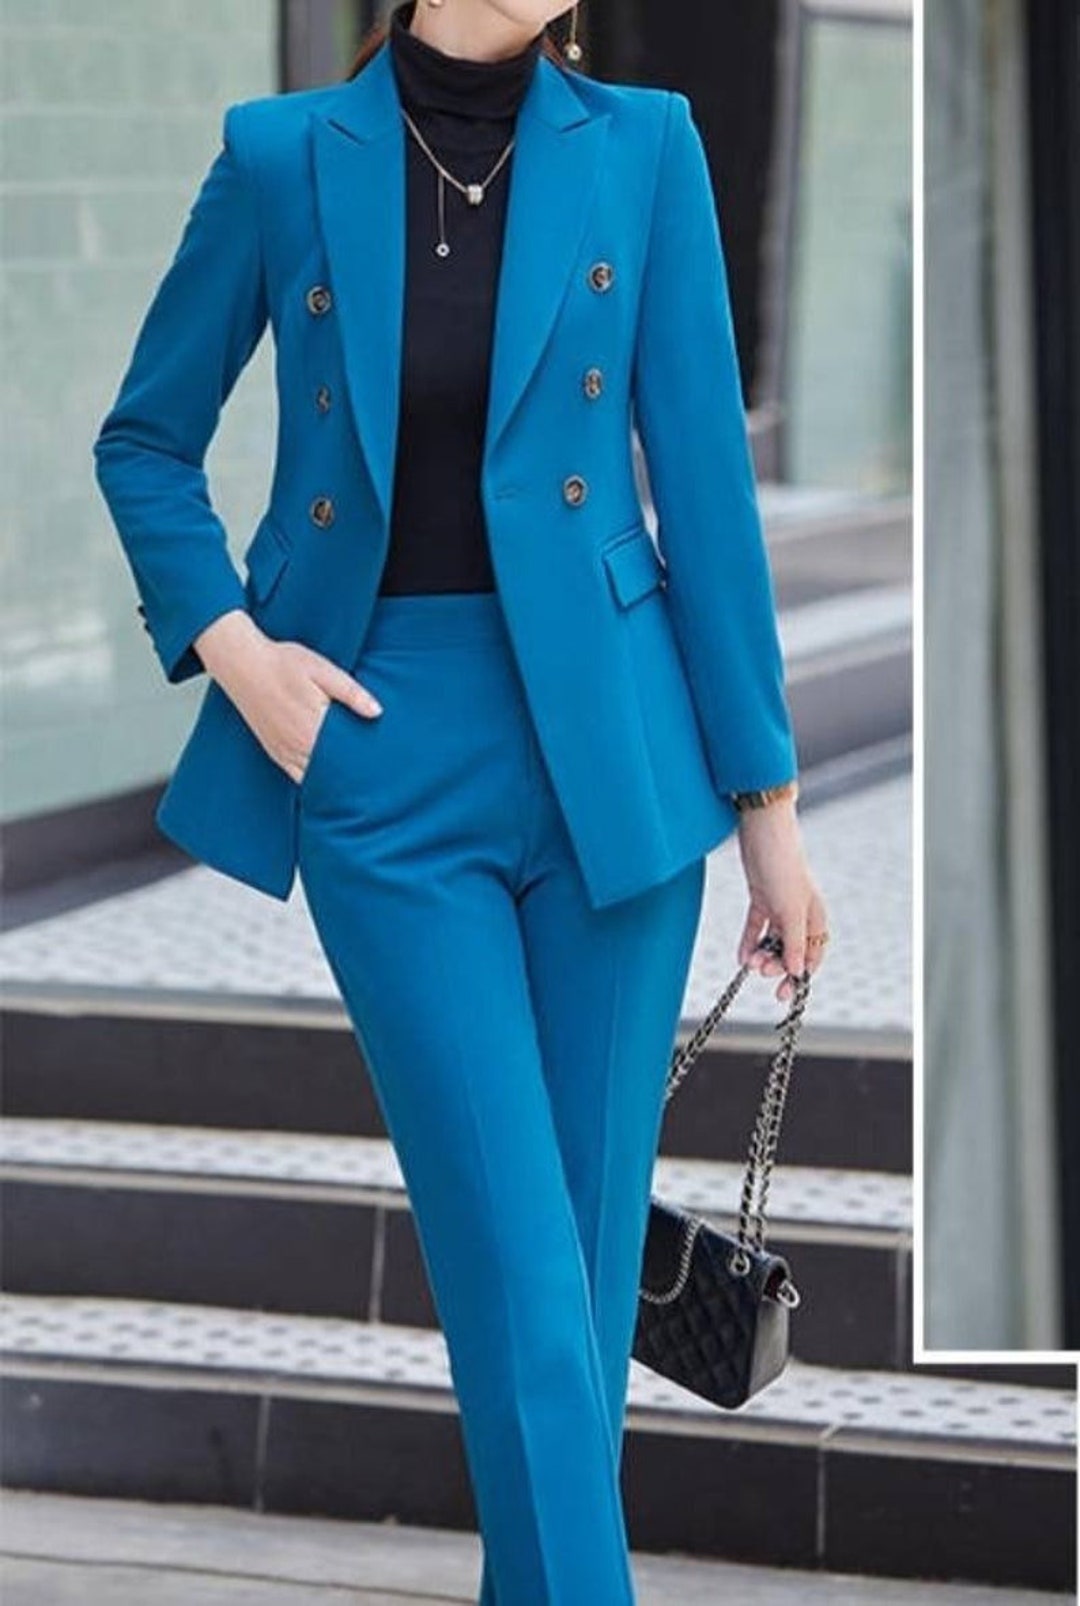 PEACOCK BLUE SUIT for Women/ Double Breasted Suit/womens Suit